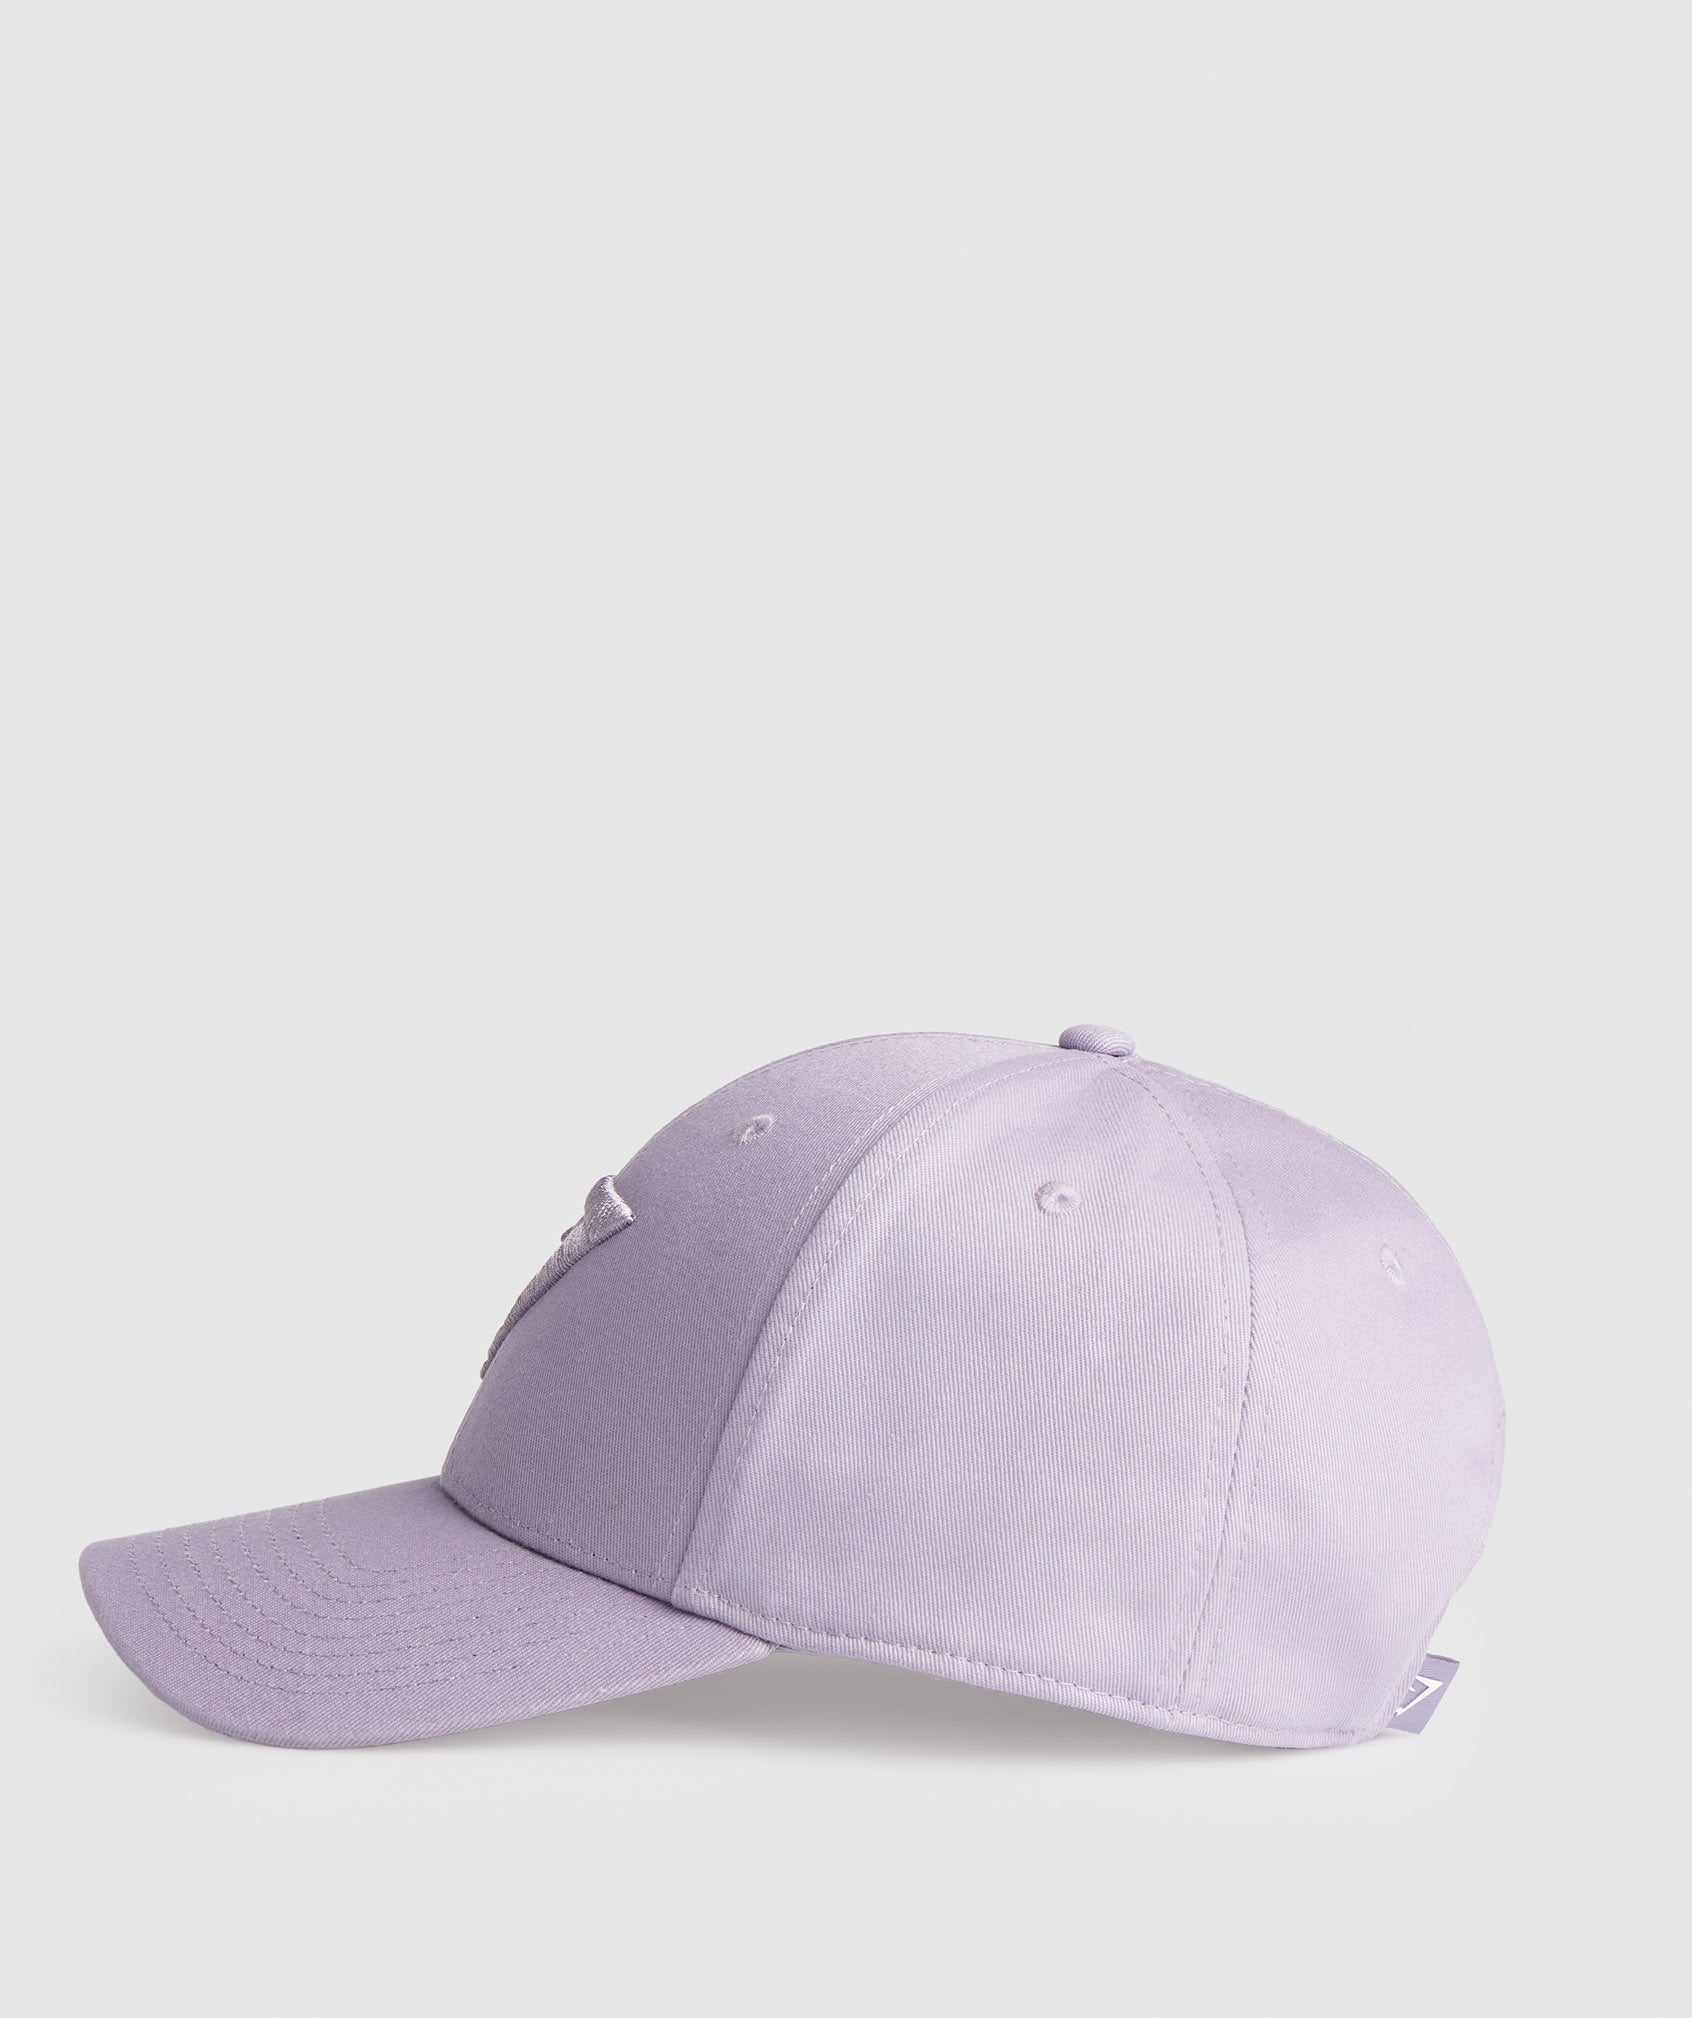 Sharkhead Cap in Shaded Lilac - view 4